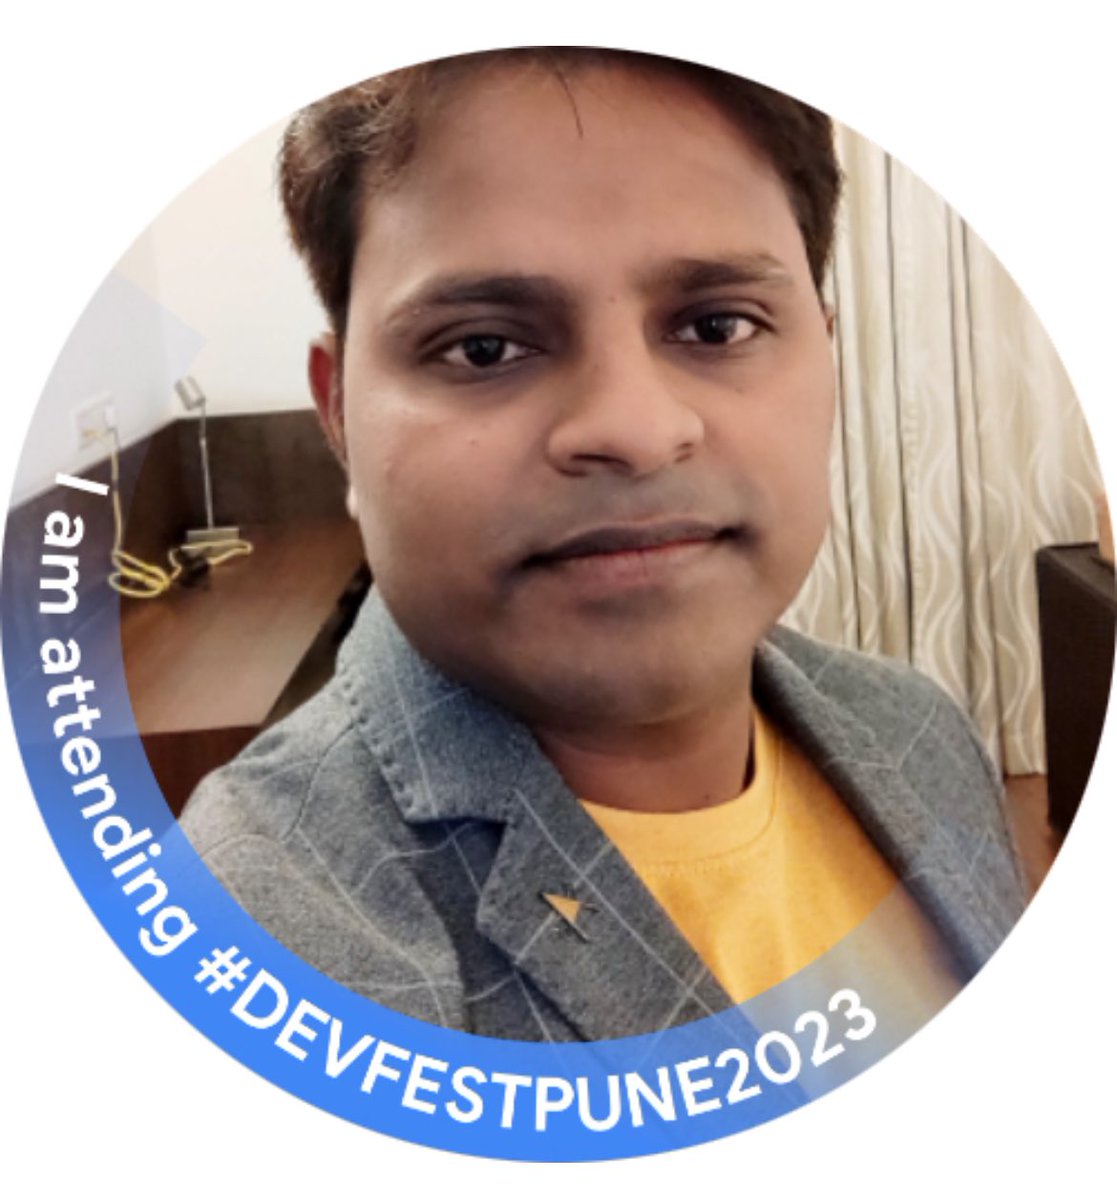 Last event of the year… I am attending DevFest Pune - 2023

See you around if you’re are joining too.

@GDGPune #devfestpune #devfest2023 #devfest #gcpcloud